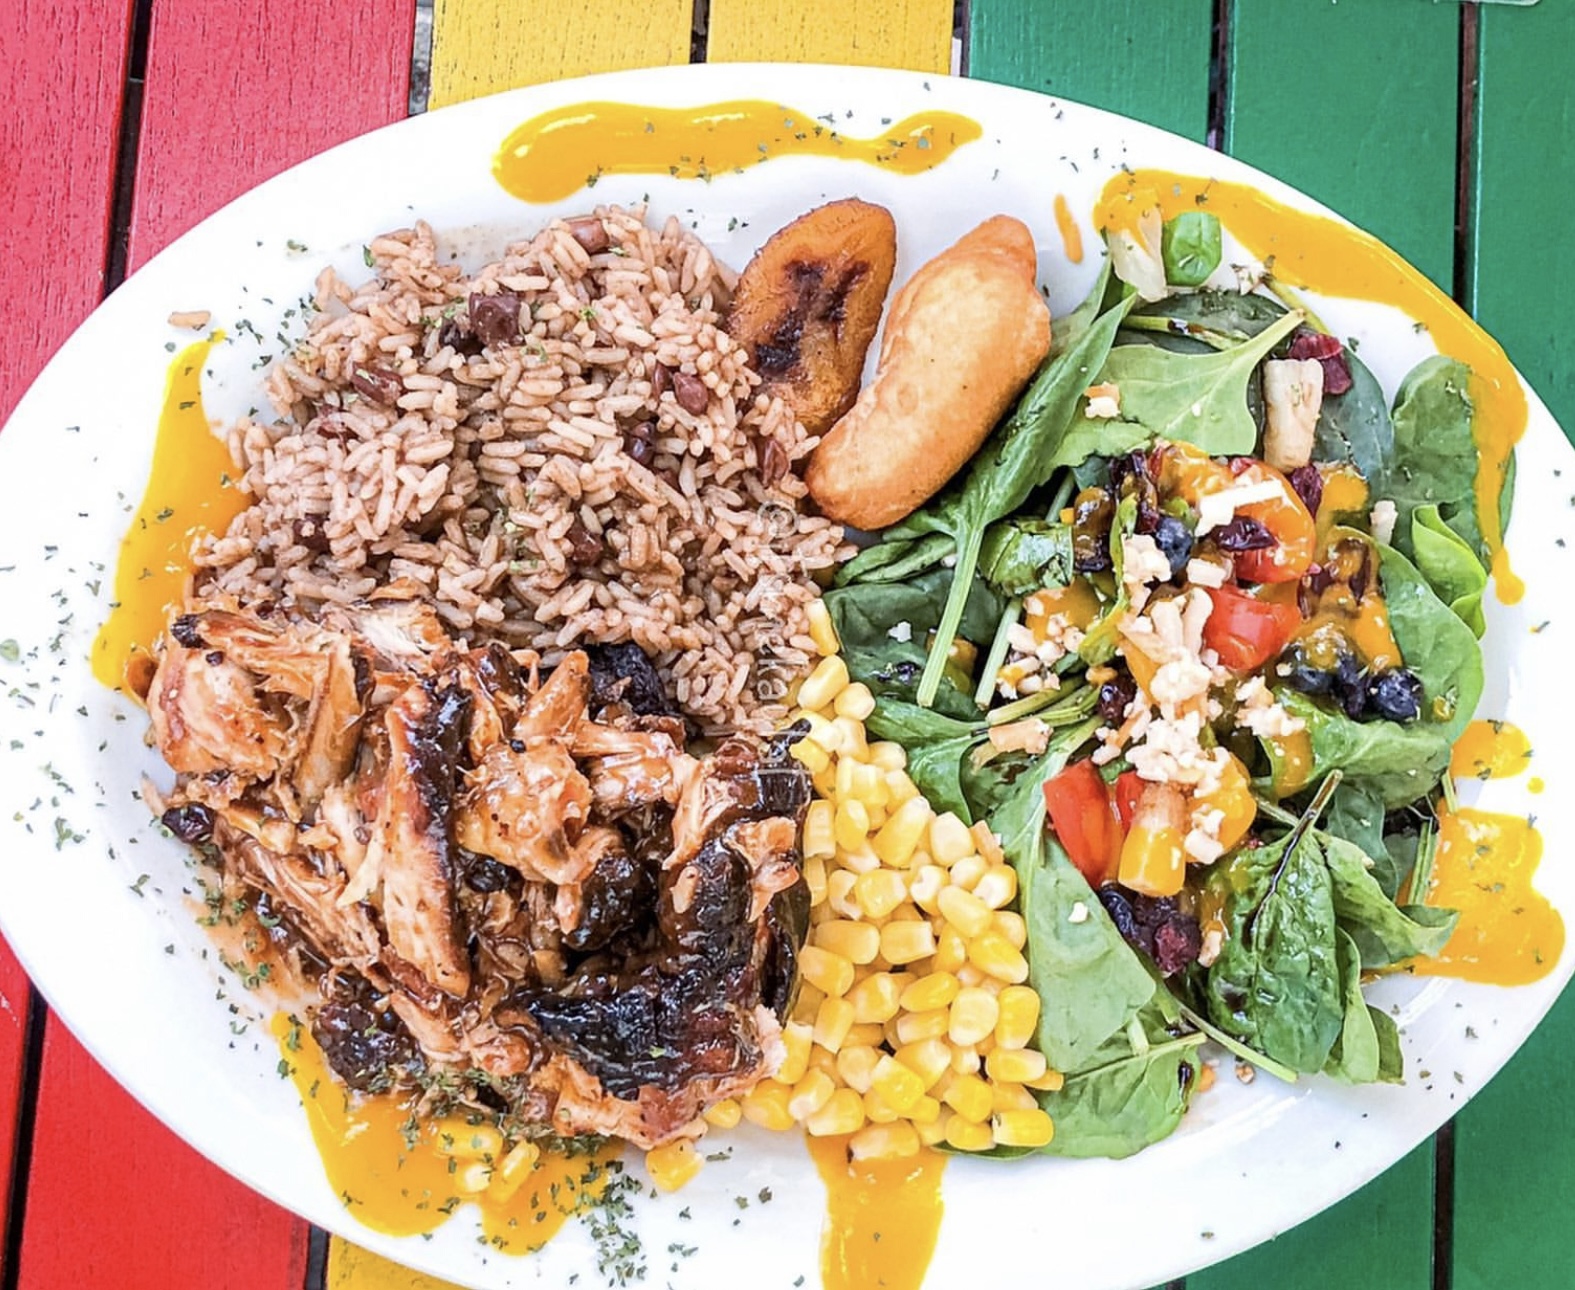 Aerial view of a plate of food from Mr. Delicious By The Beach in Pickering, Ontario